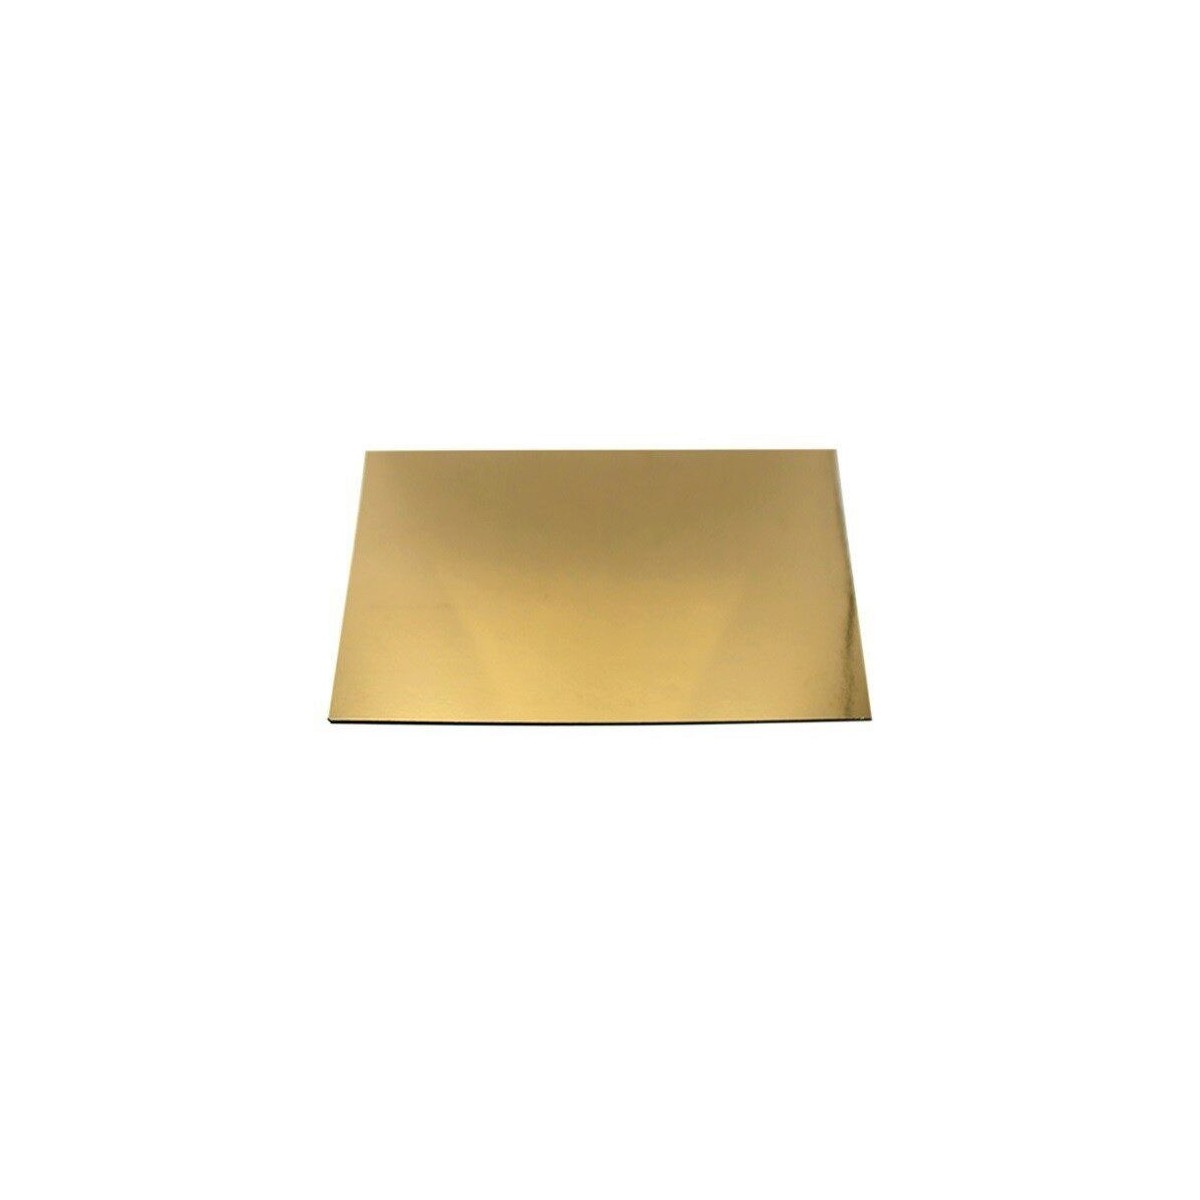 GOLD RECTANGULAR CAKE BOARD   60 X 40CM 25 PIECES FOSTPLUS INCLUDED  PIECE